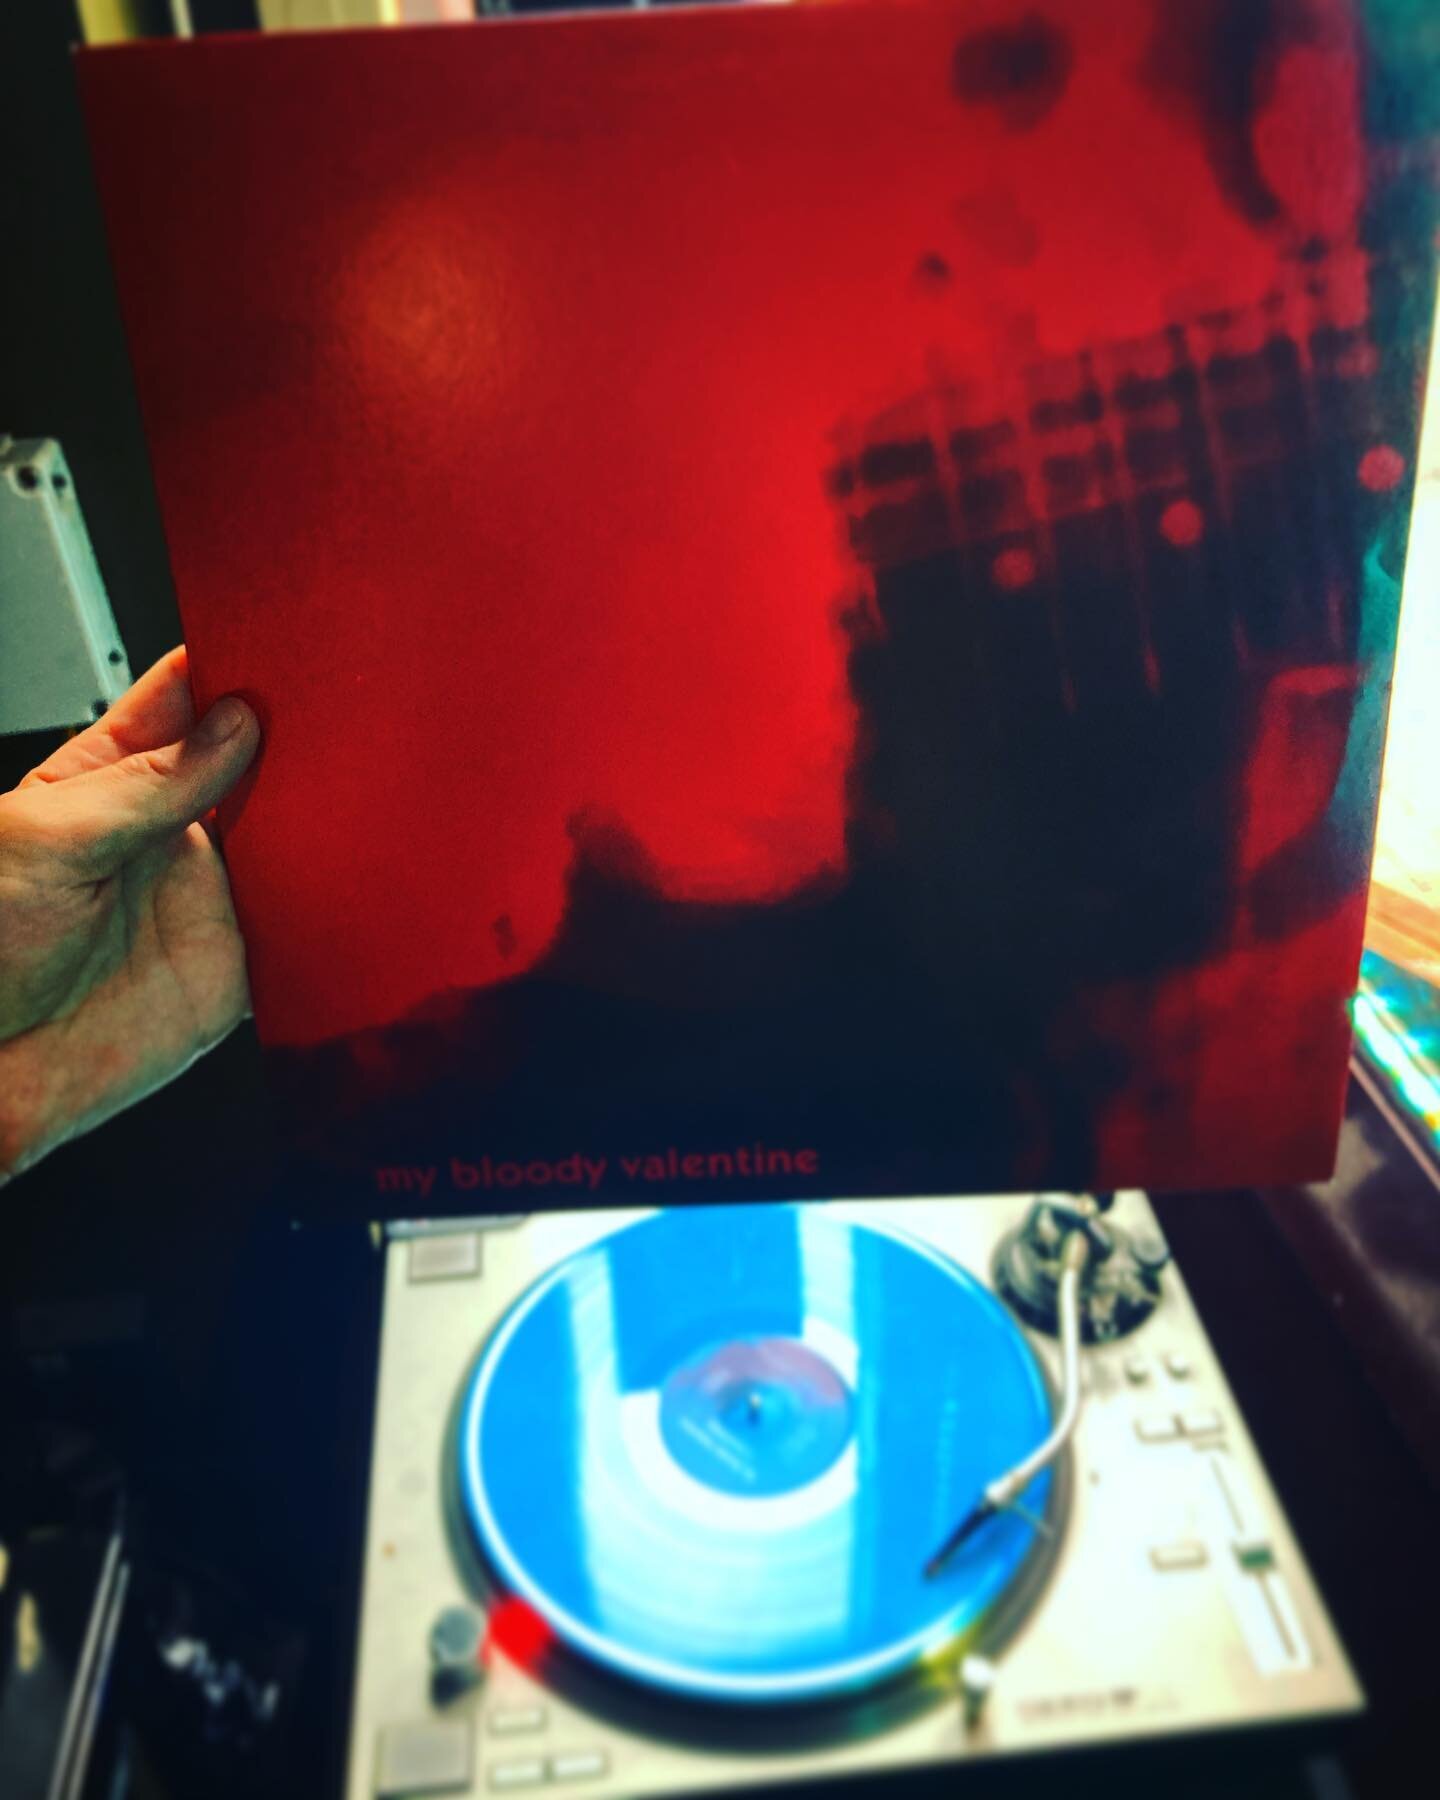 Can&rsquo;t think of another bar that will play Loveless on vinyl front to back. Join us for a cocktail, a pizza and an absolute listen to this Shoegaze classic!! 

#mybloodyvalentine #shoegaze